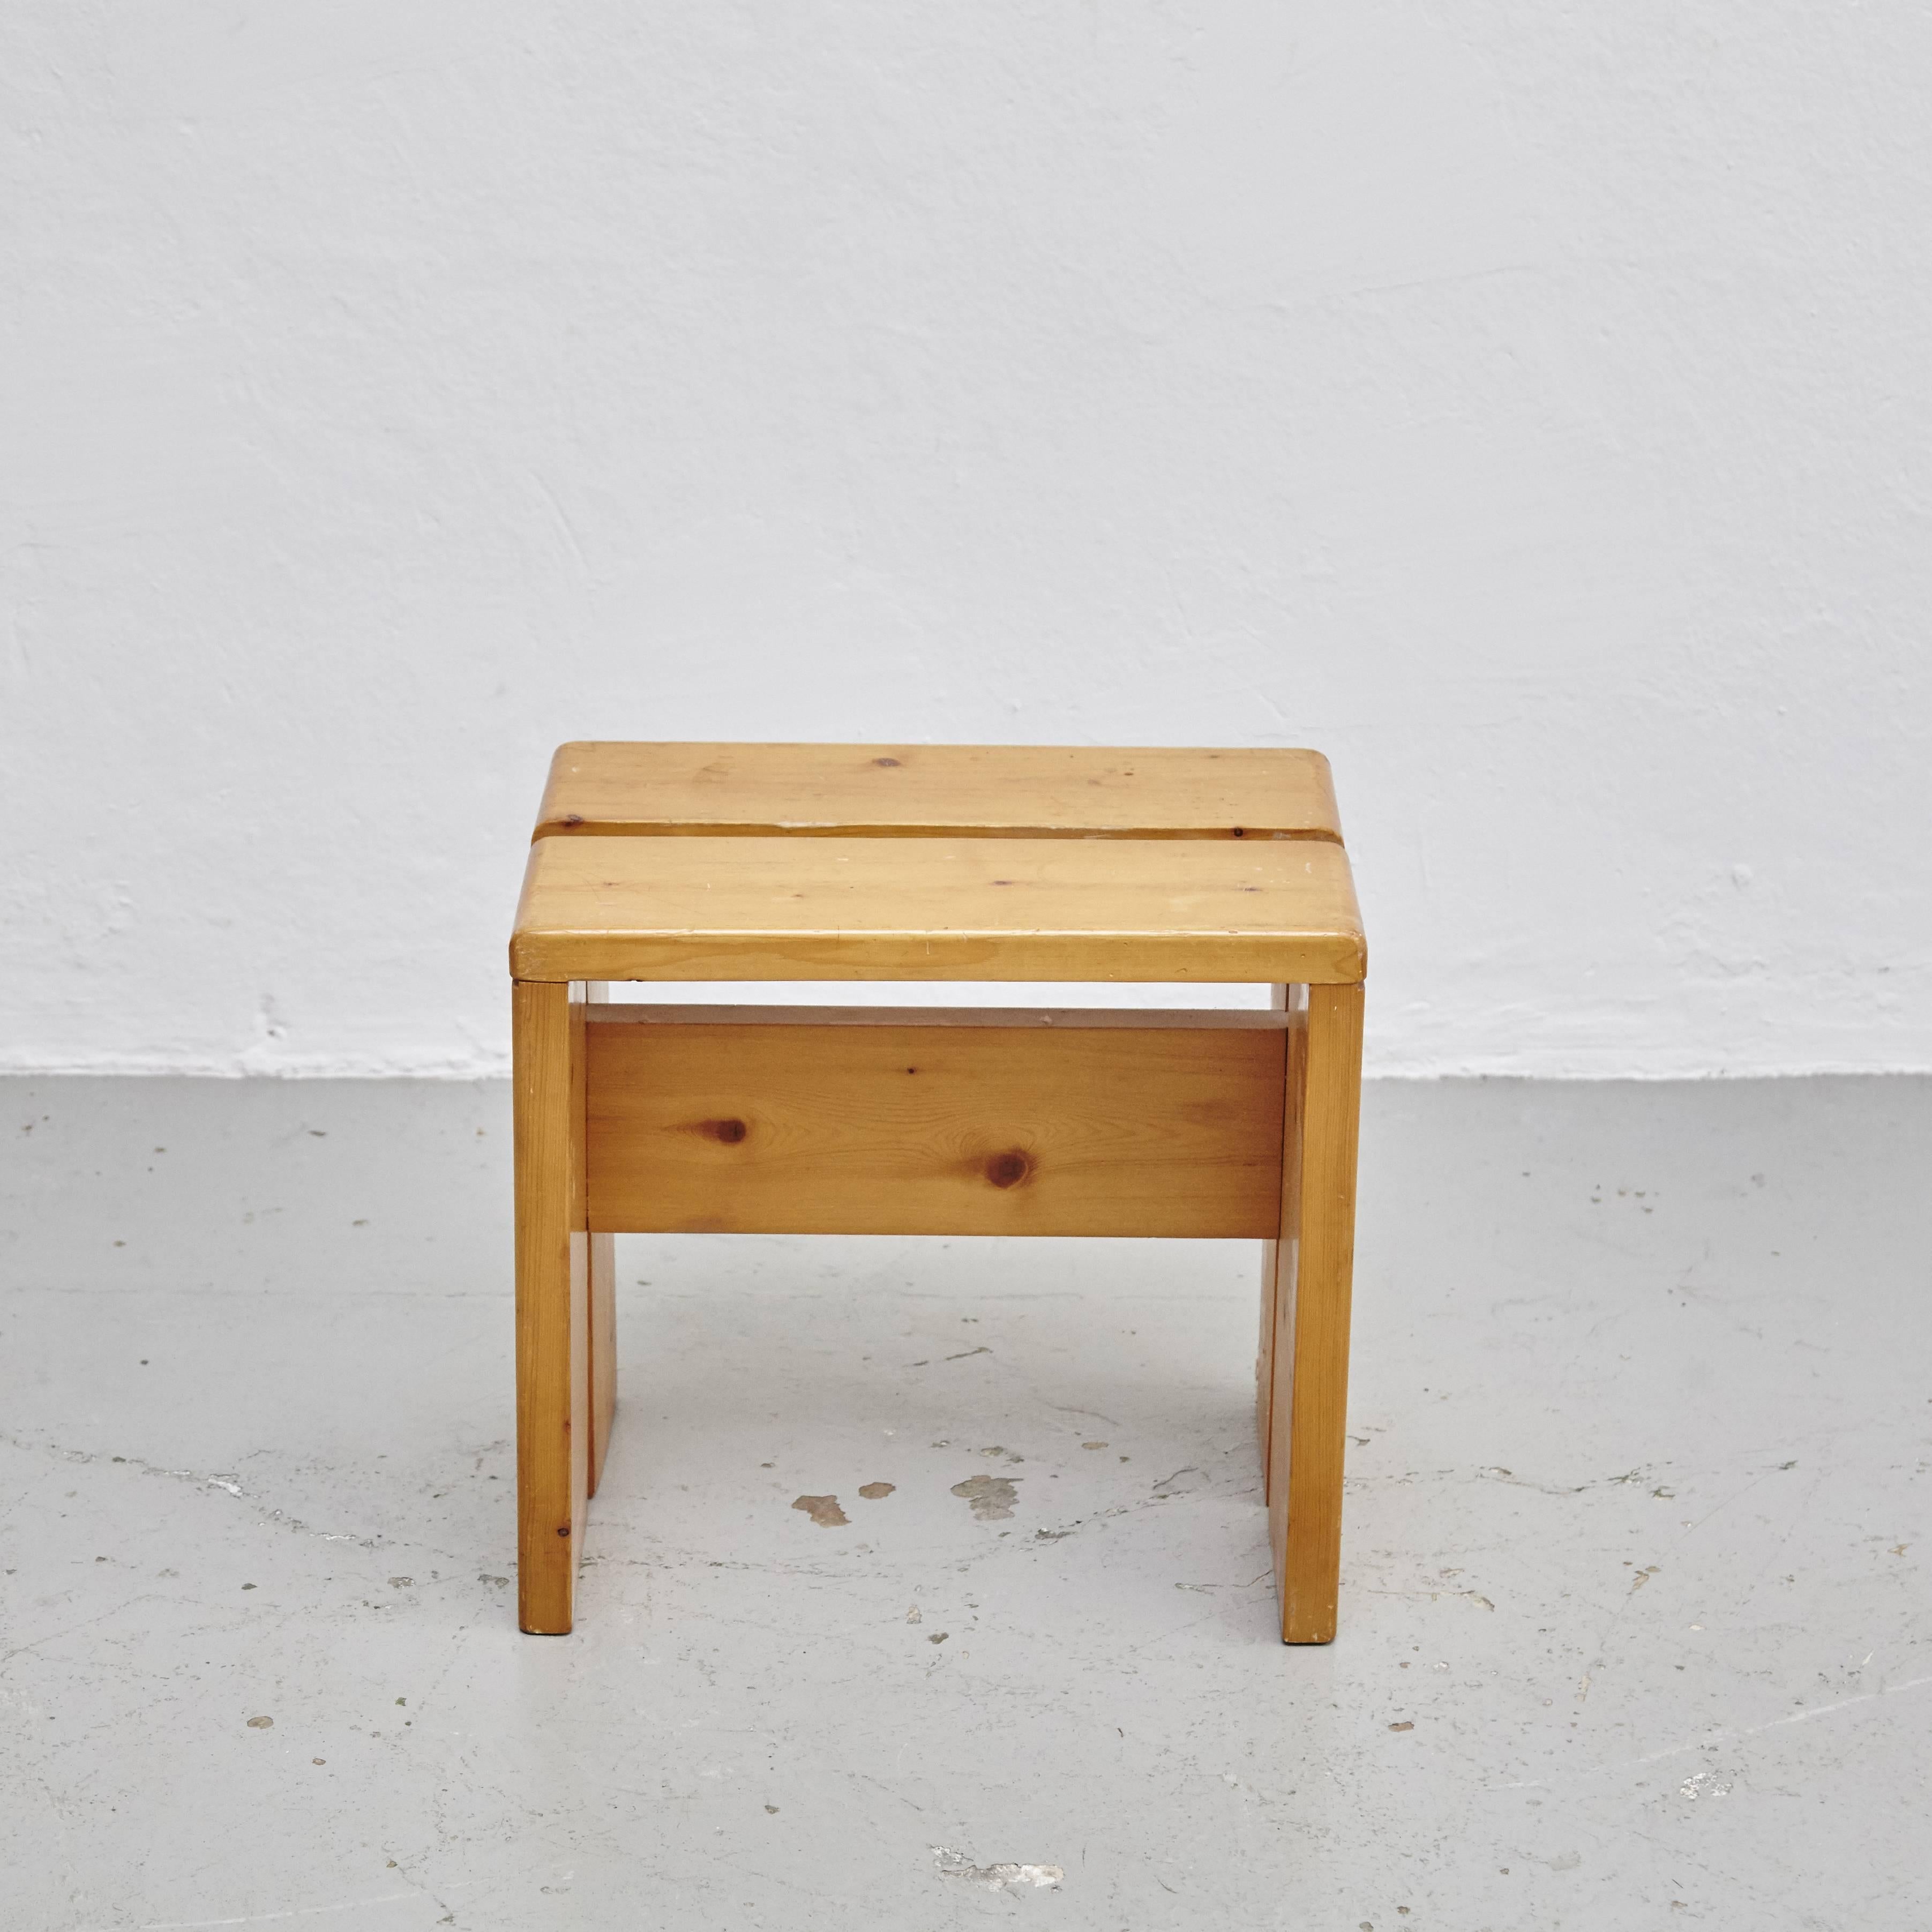 French Pine Wood Stool by Charlotte Perriand for Les Arcs, circa 1960